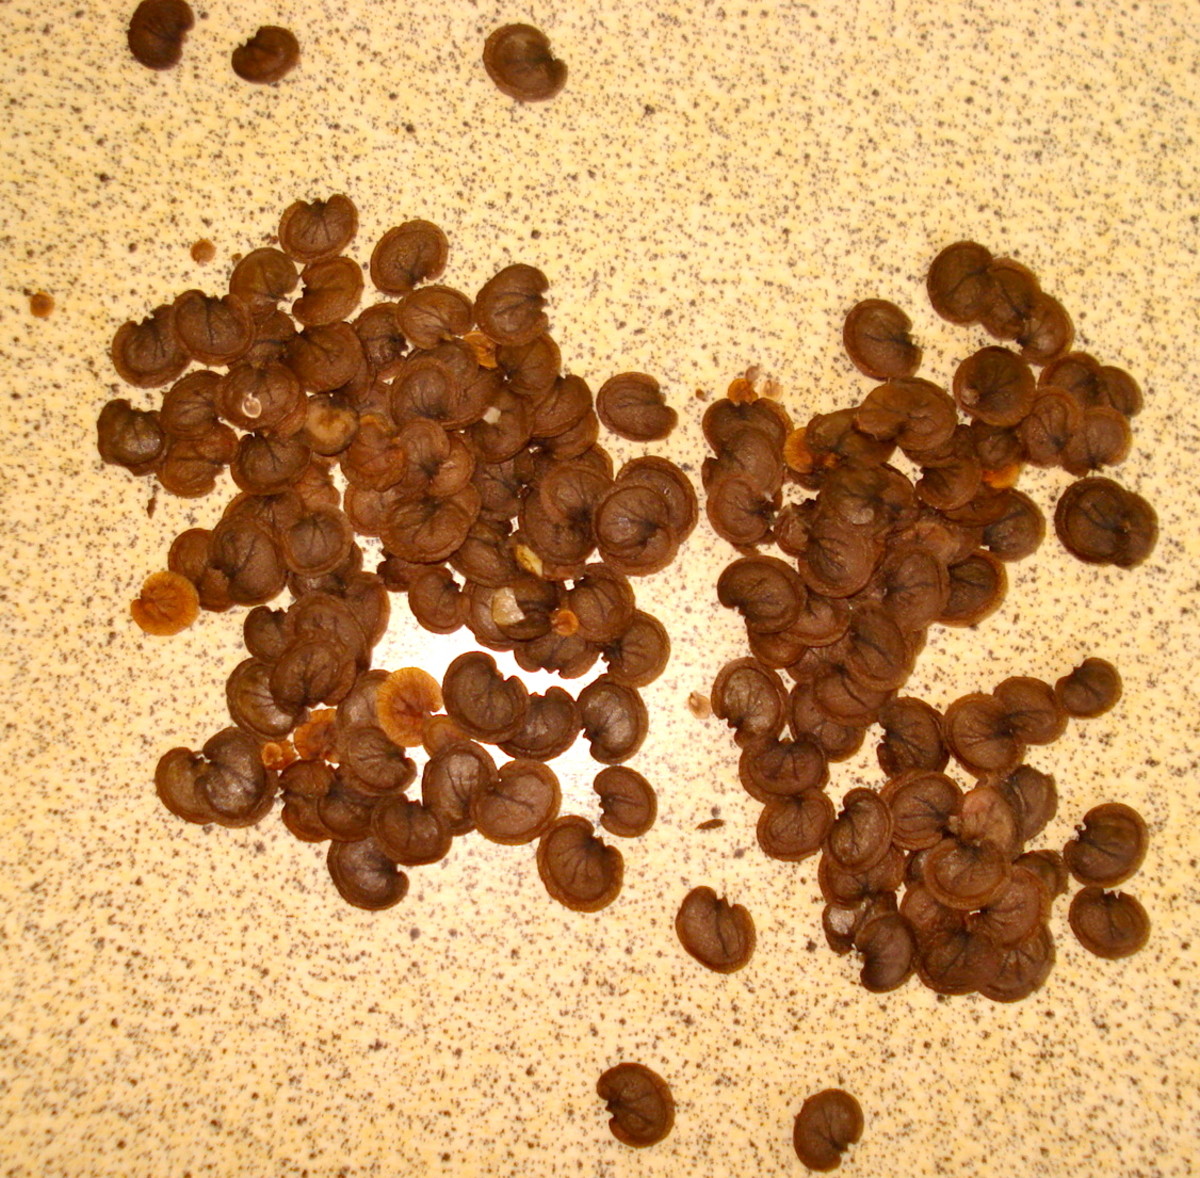 The Large, Heart-shaped Seeds